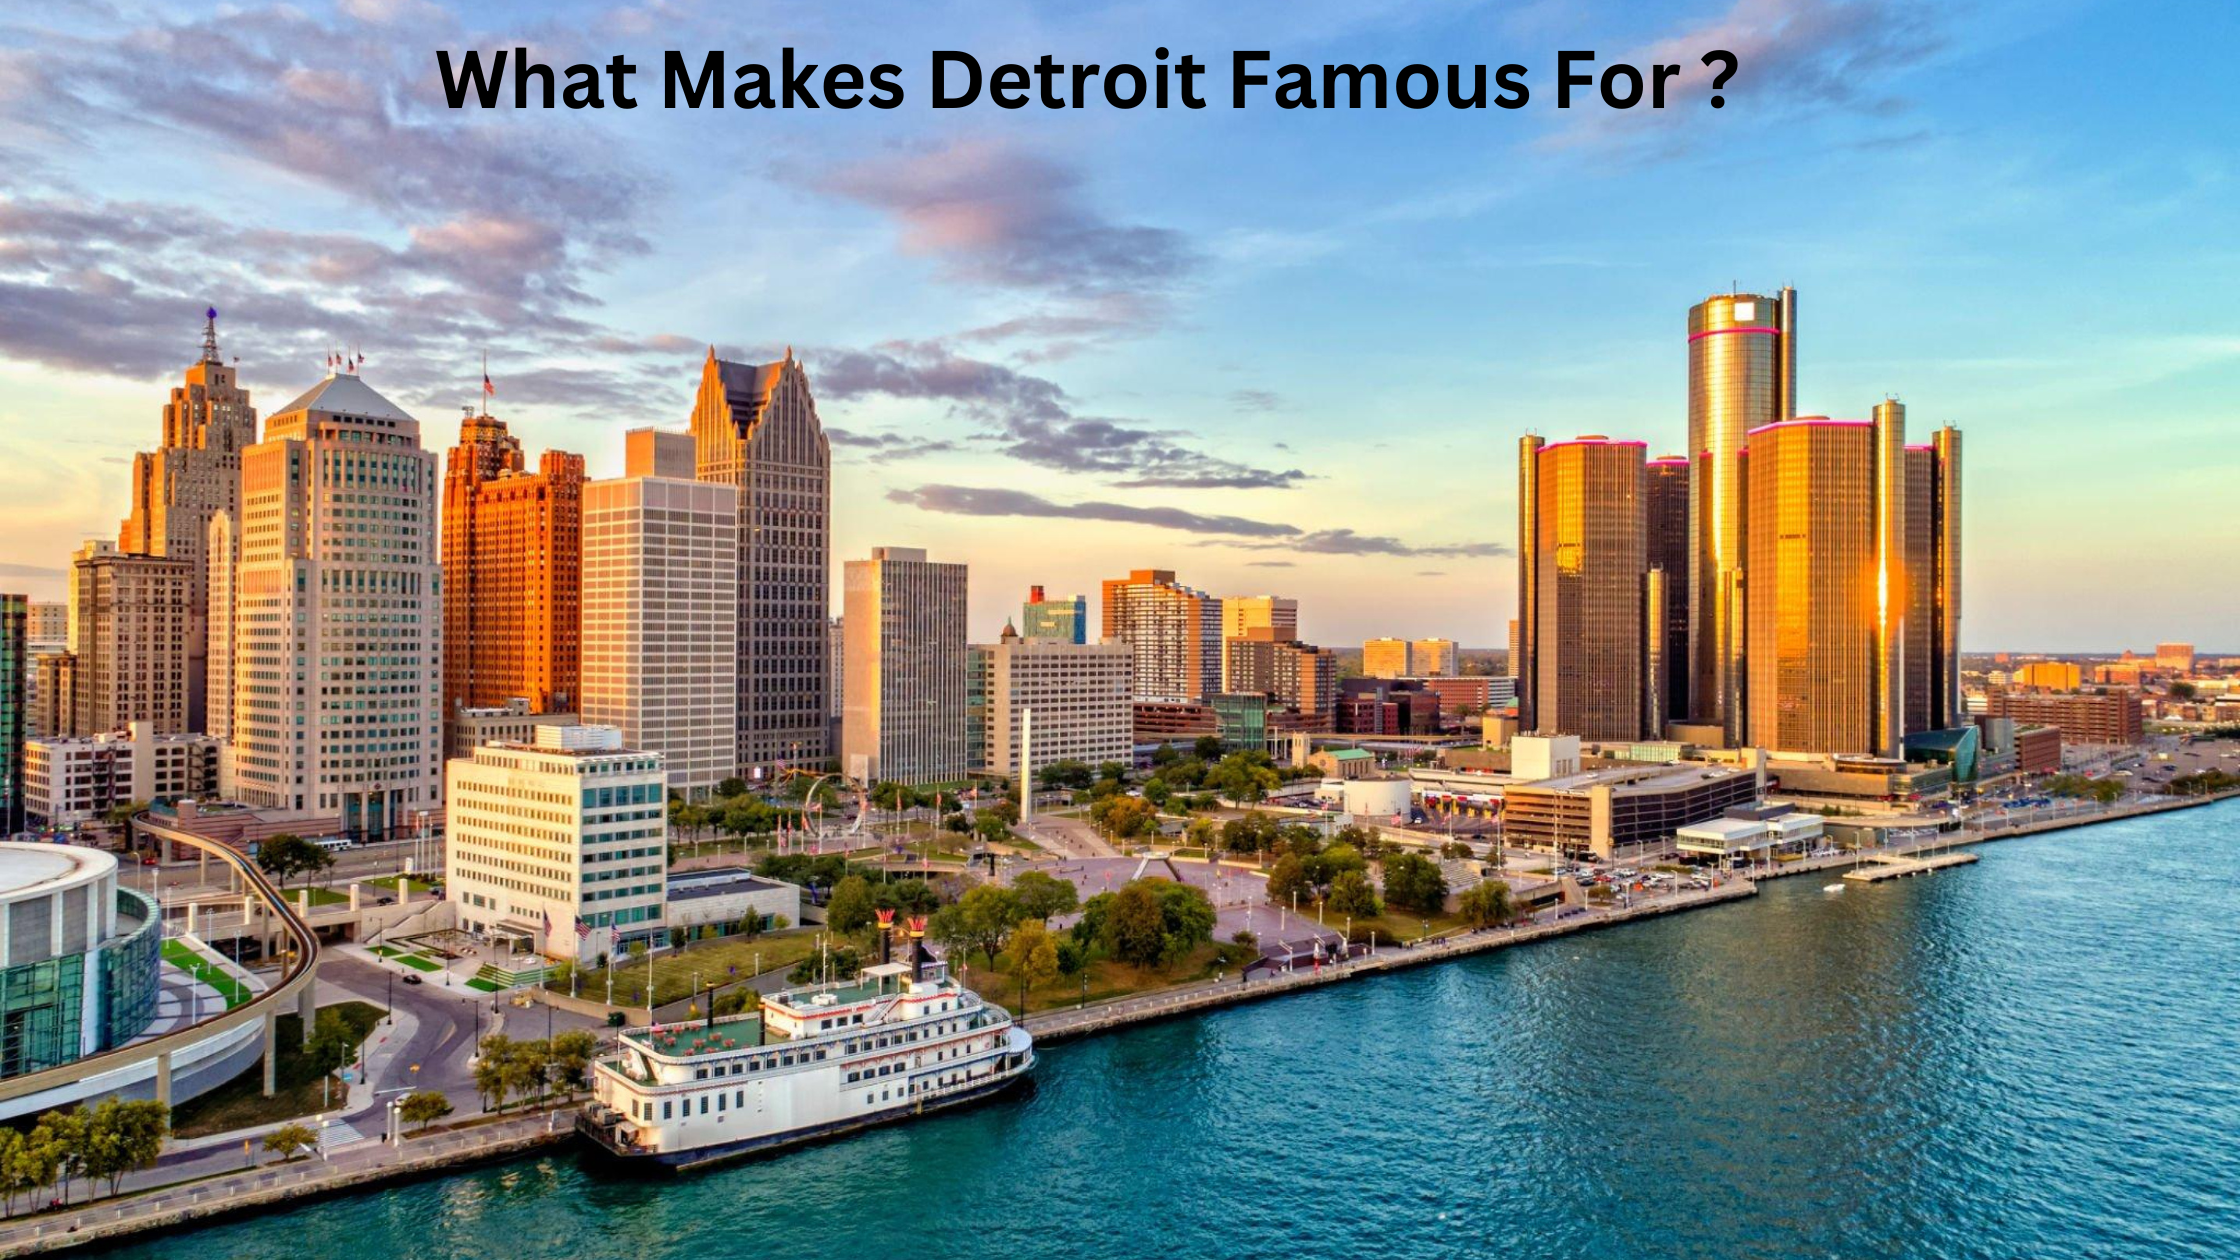 What Makes Detroit Famous For